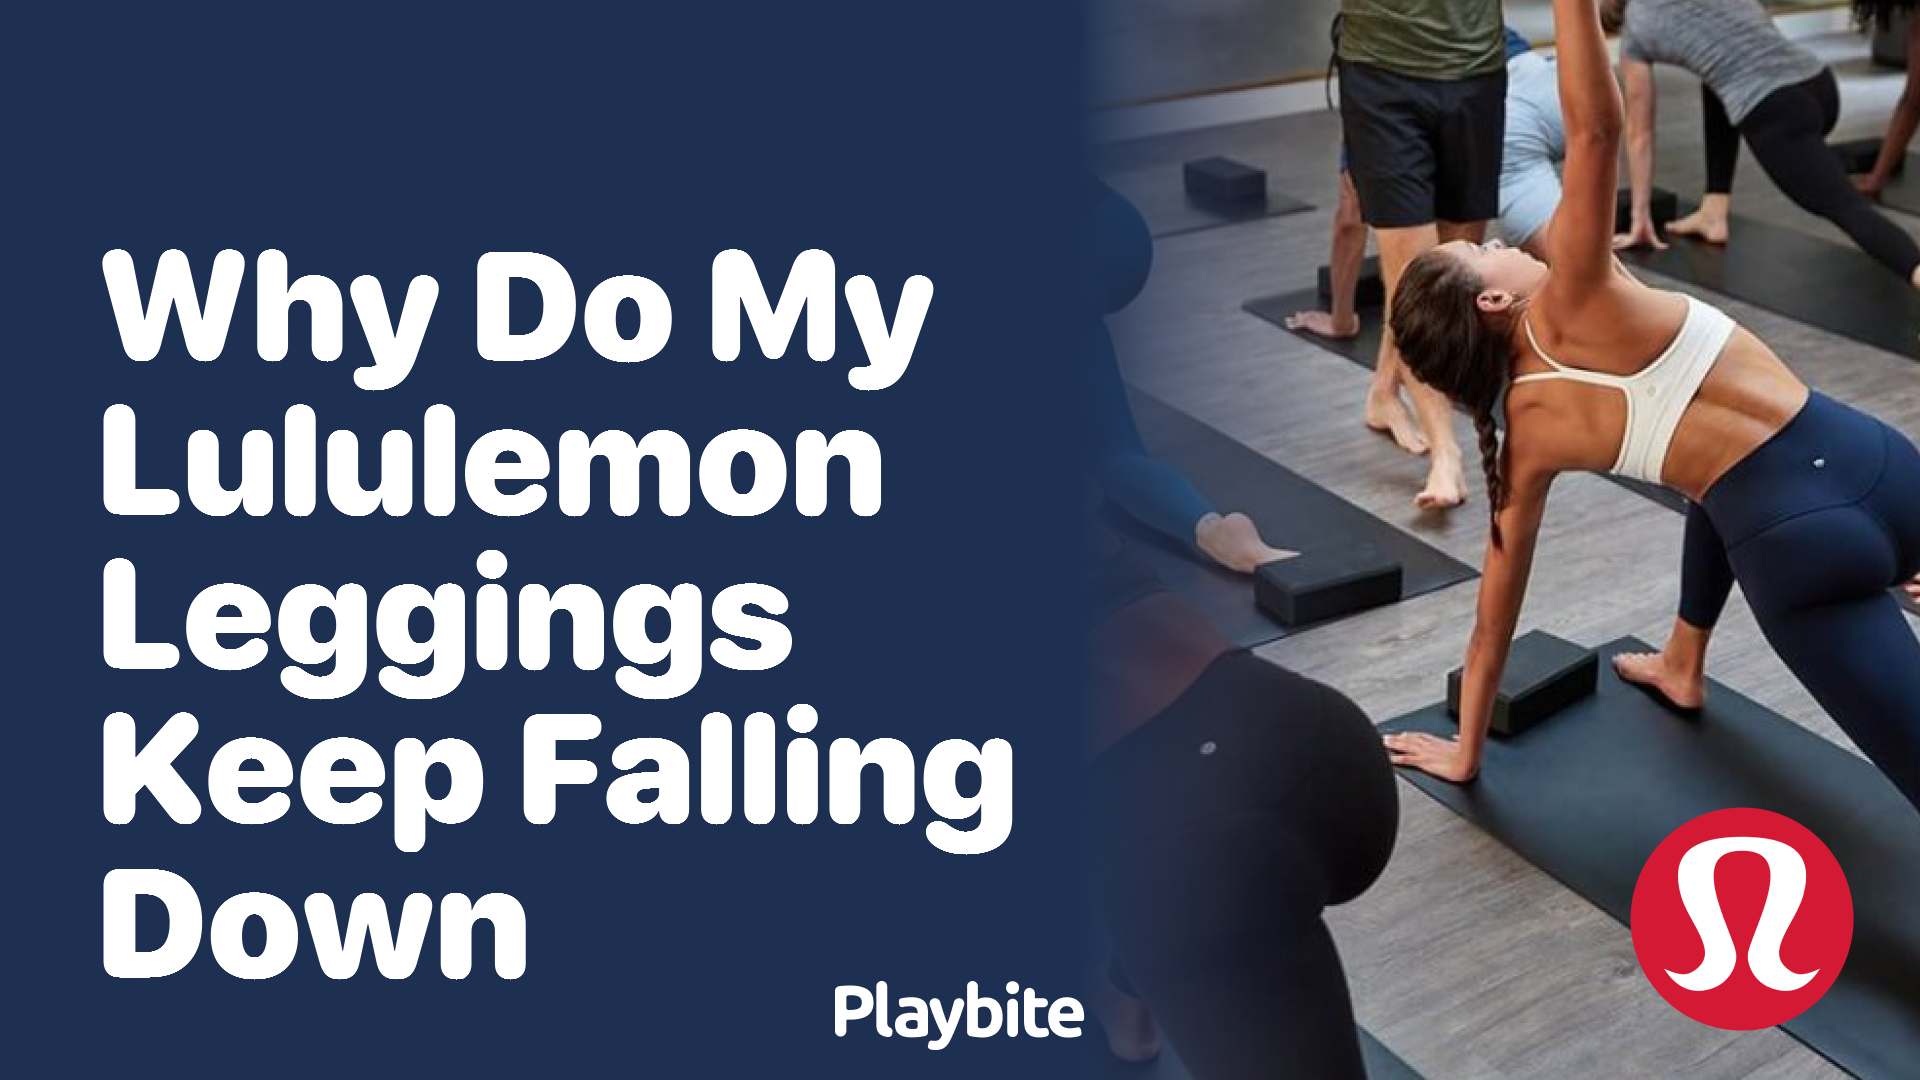 https://www.playbite.com/wp-content/uploads/sites/3/2024/03/why-do-my-lululemon-leggings-keep-falling-down.png